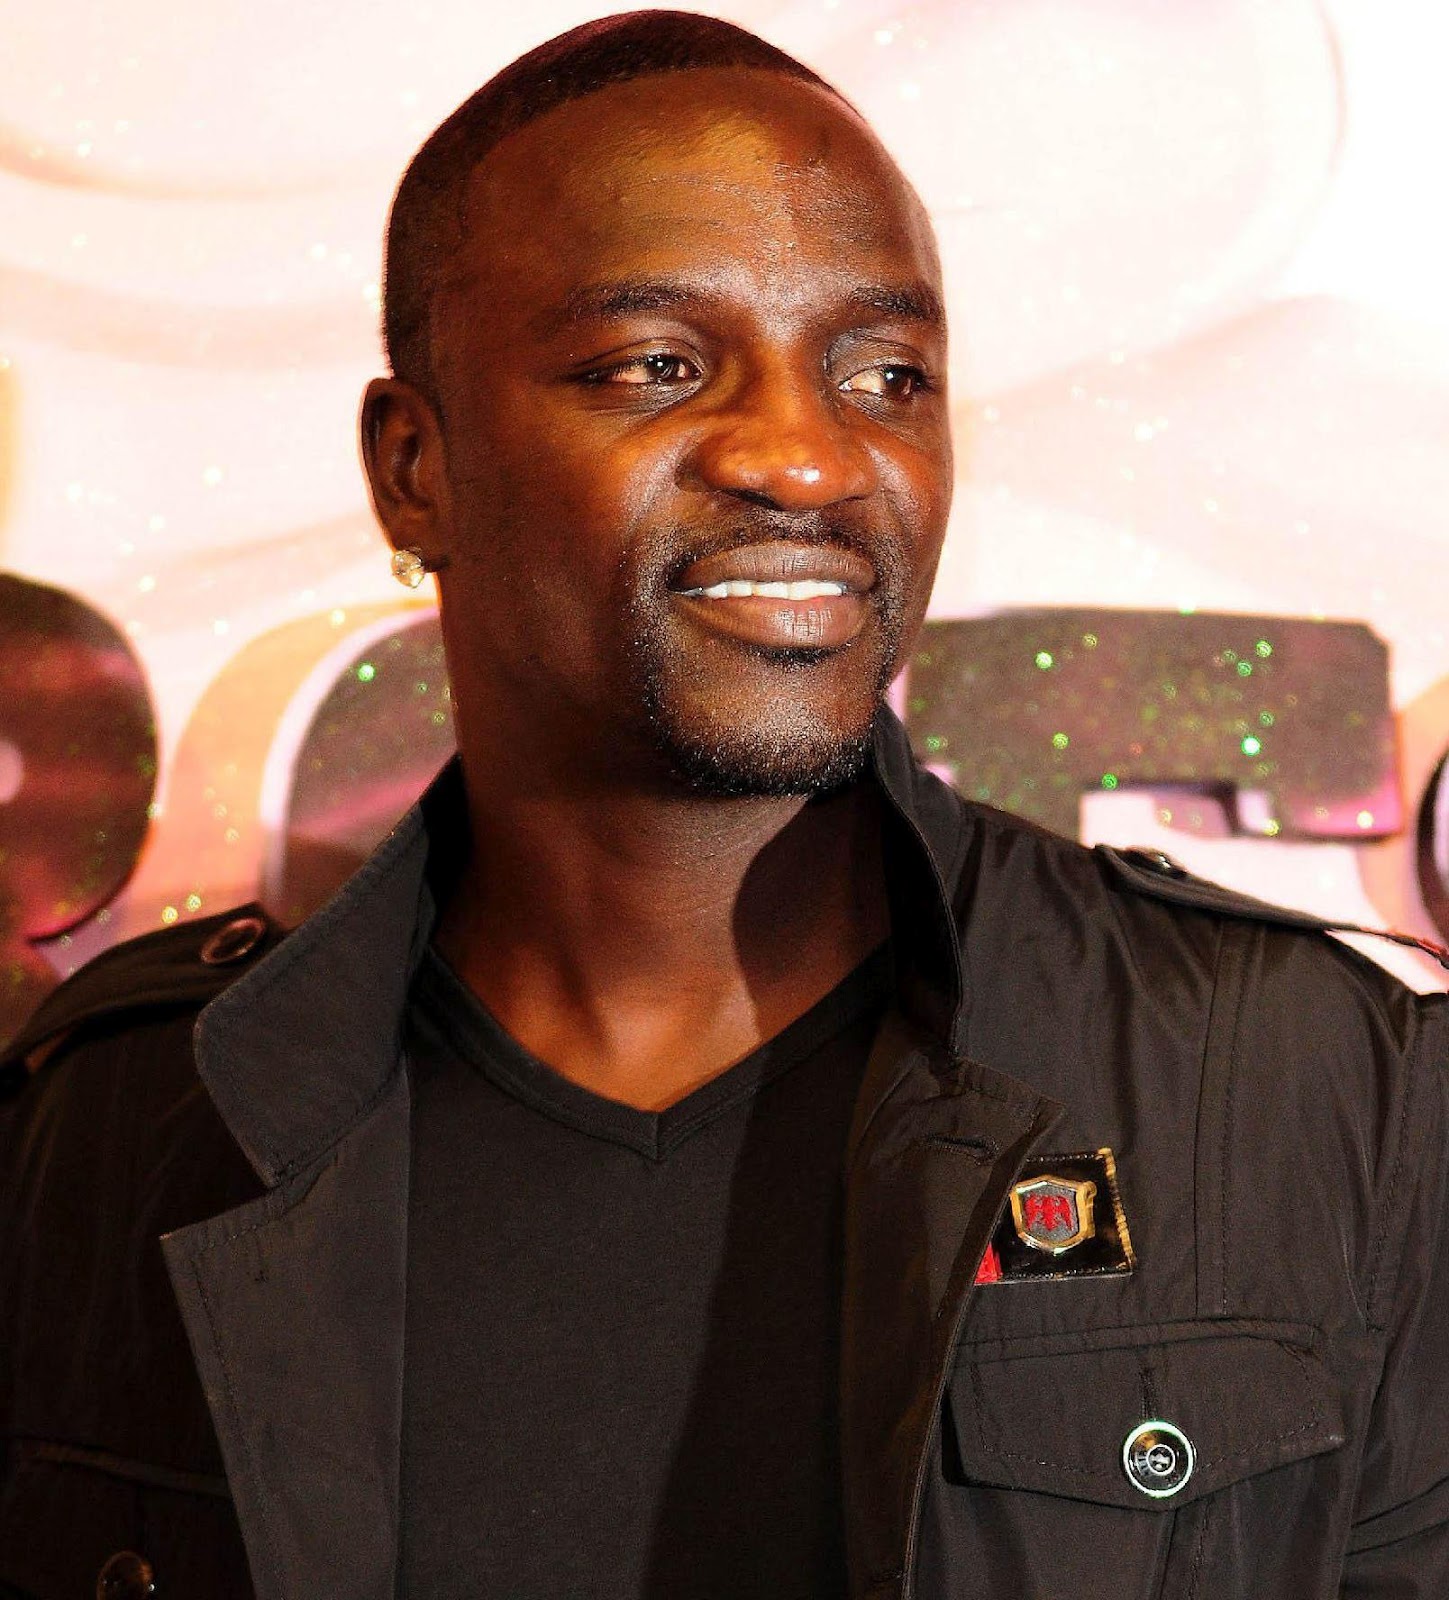 Hot Secrets THE PSQUARE, AKON COLLABO VIDEO IS OUT